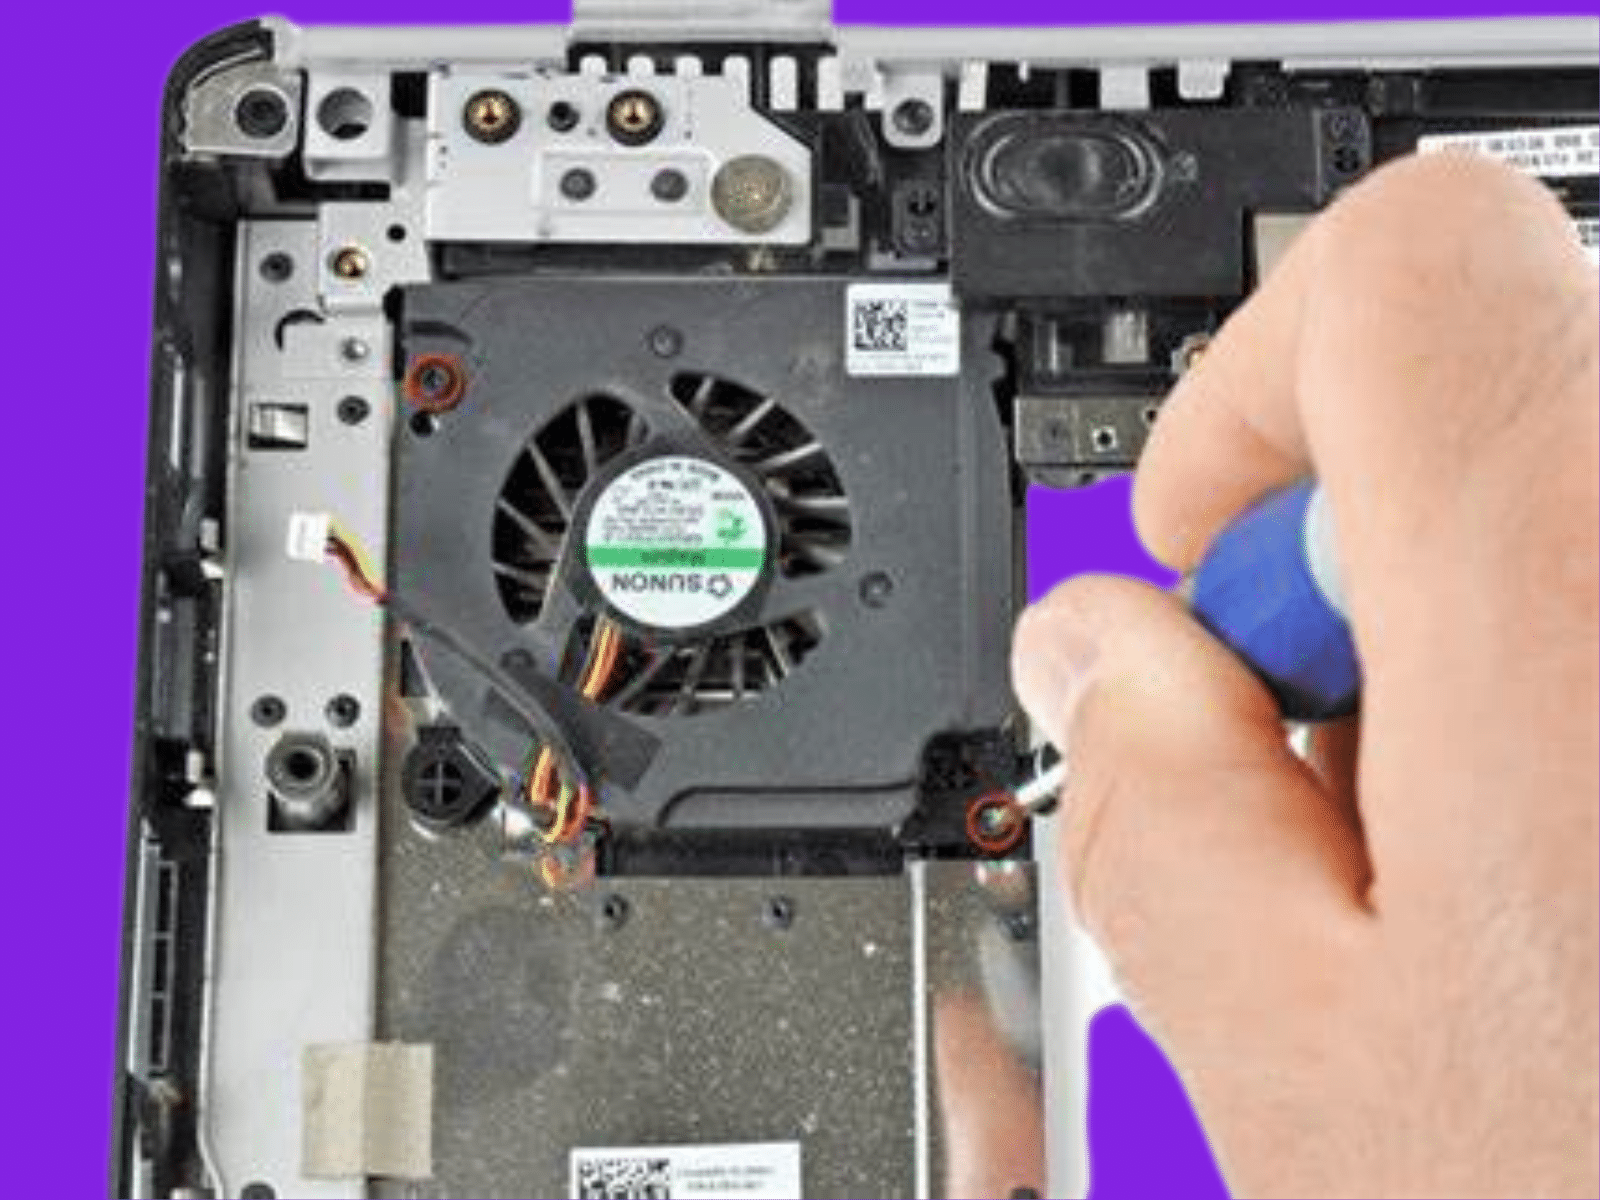 Remove the Screws Securing the Cooler or Fan to the Motherboard